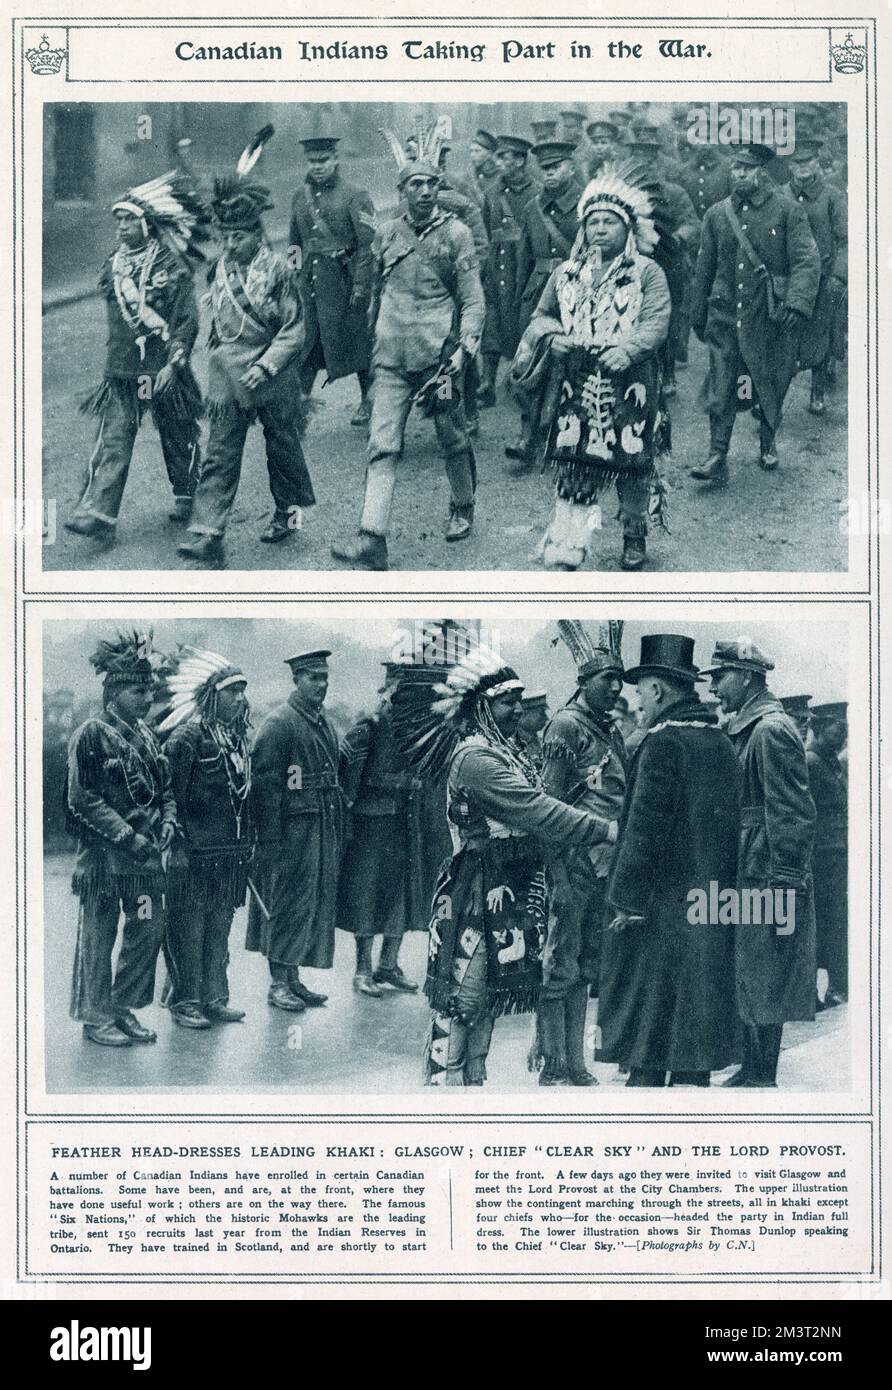 Canadian Indians in traditional dress taking part in the war. Stock Photo